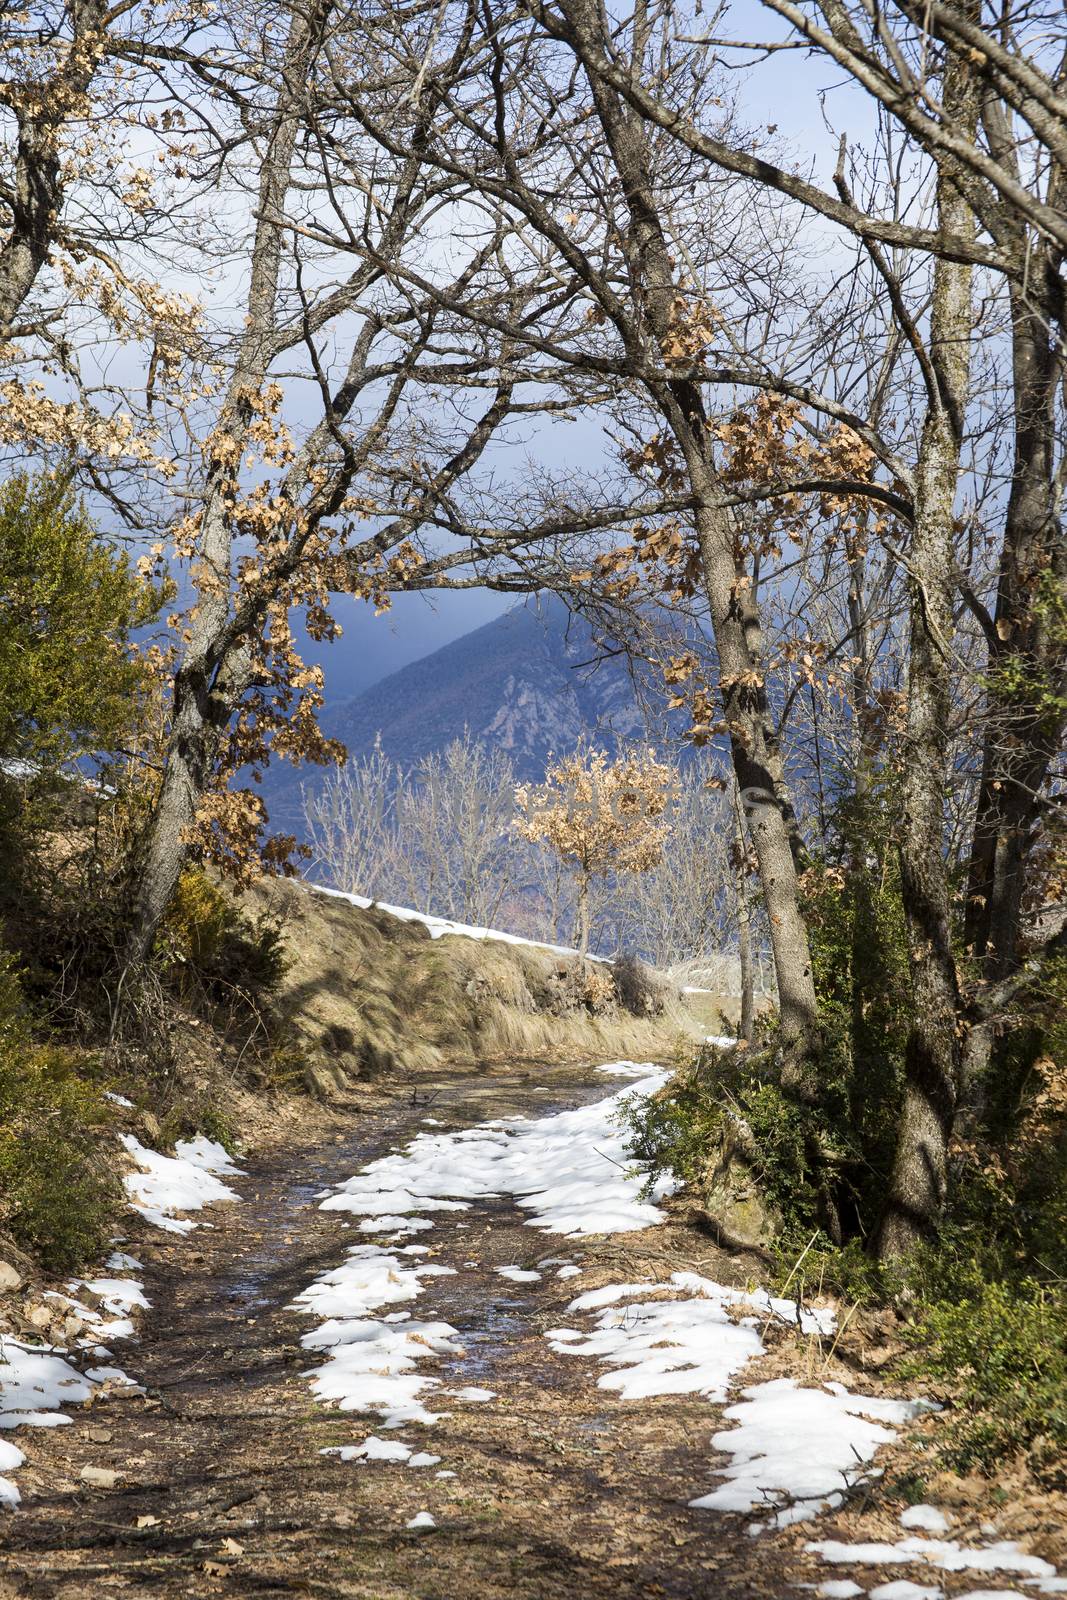 The path in the mountain forest, on which lies melting snow, lit by a bright spring sun. In the distance, mountain peaks are visible against a darkened sky.